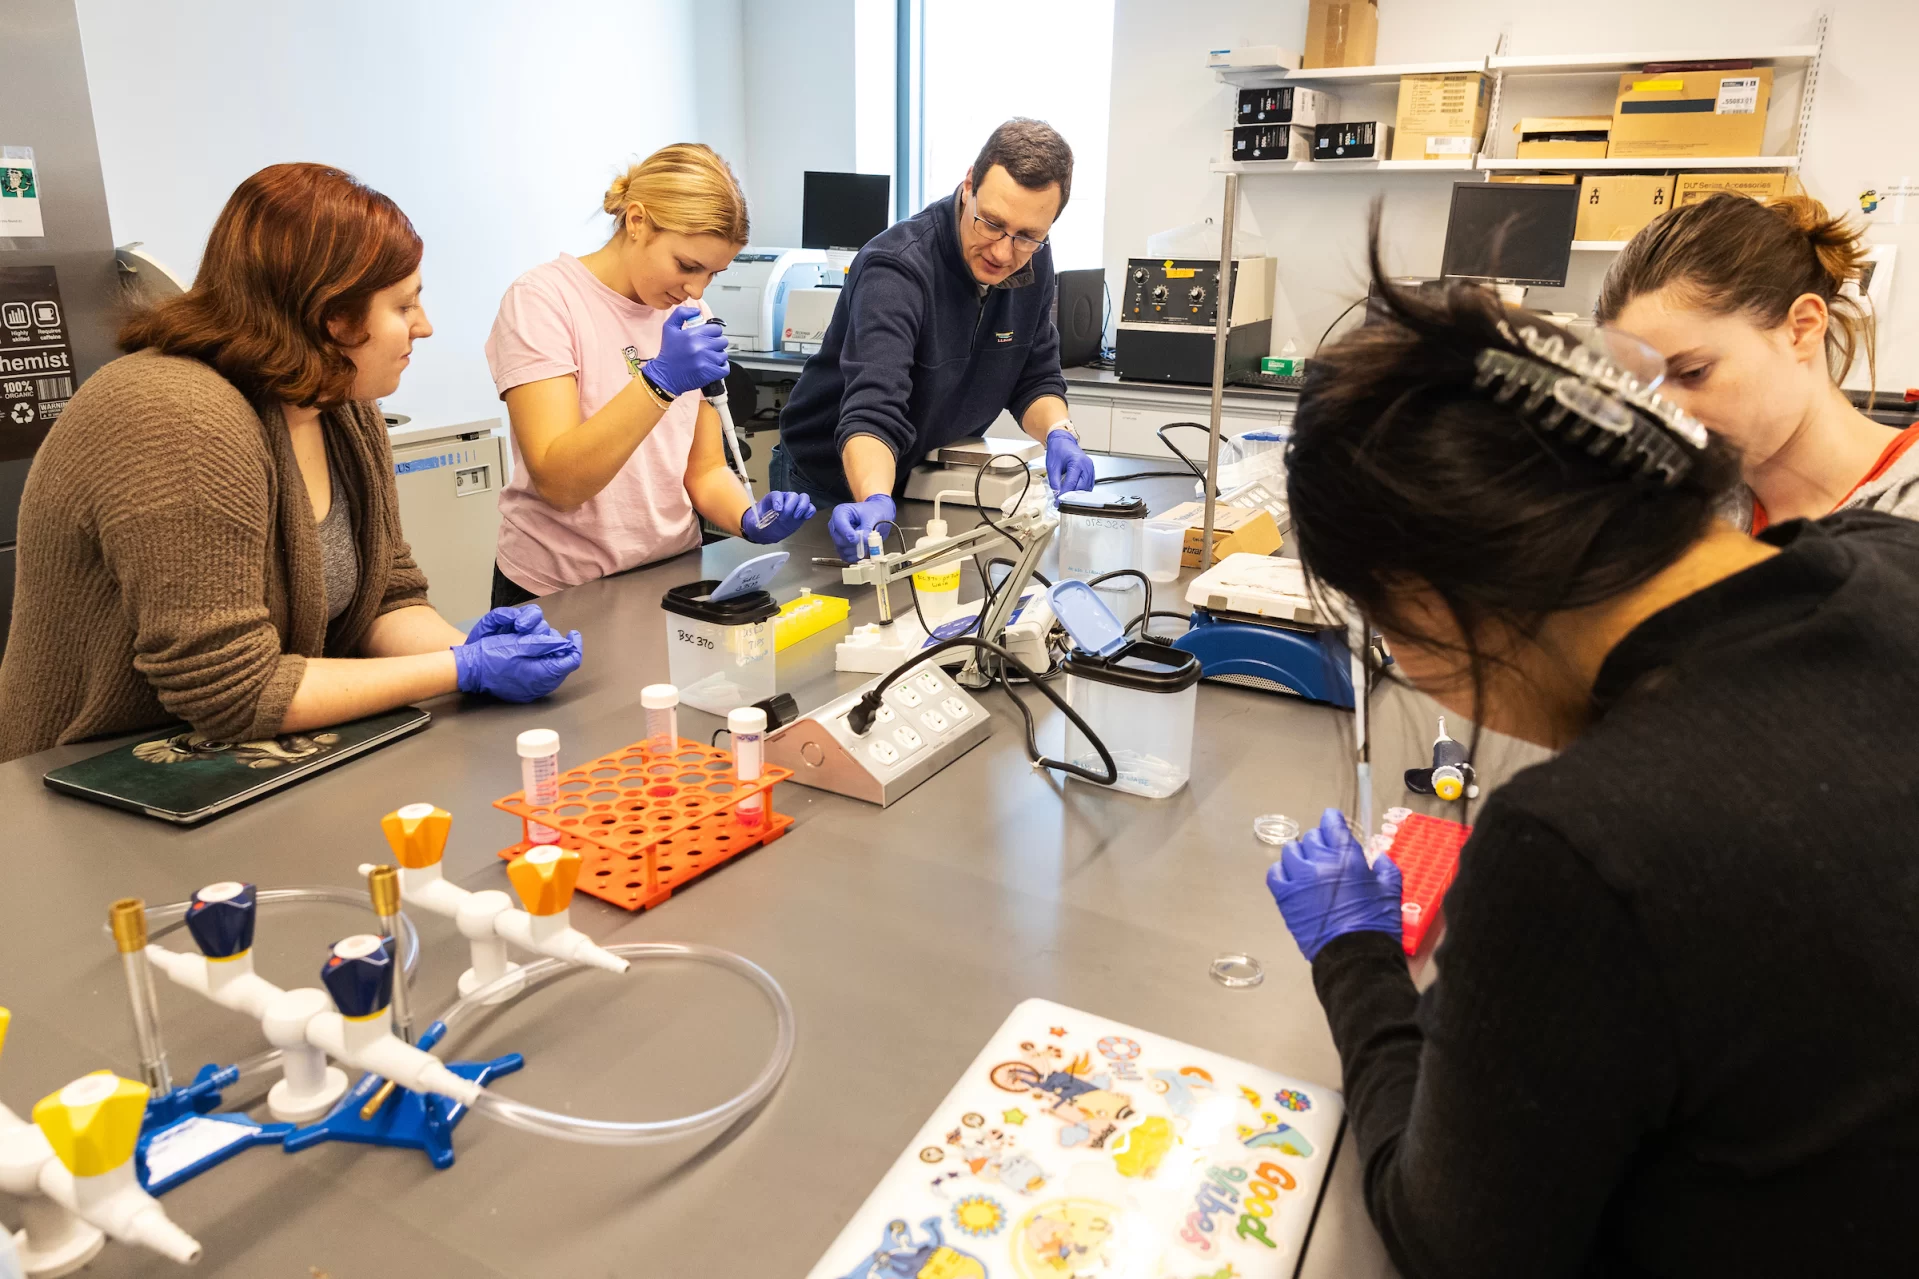 Moments from Lab-Based Biological Inquiry Cellular Neuroscience taught by Martin Kruse, associate professor of biology and neuroscience, in Bonney Science Center Room 370 on January 25, 2024. (Theophil Syslo | Bates College)